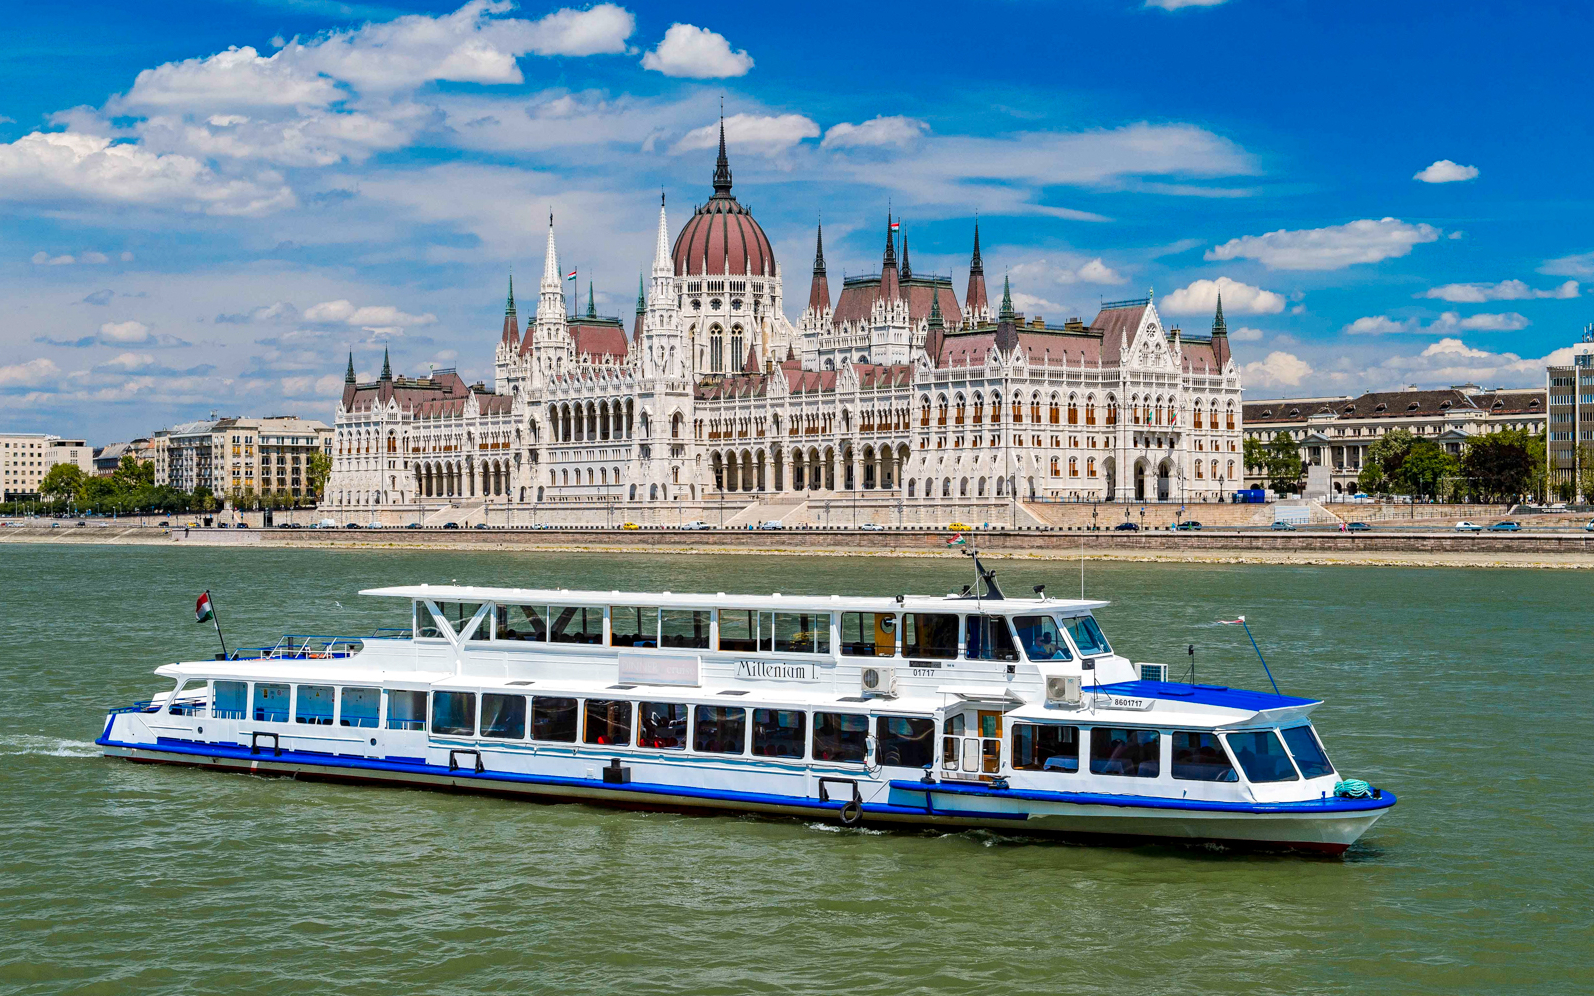 budapesht-what-to-see-in-hungary-jintravel.com